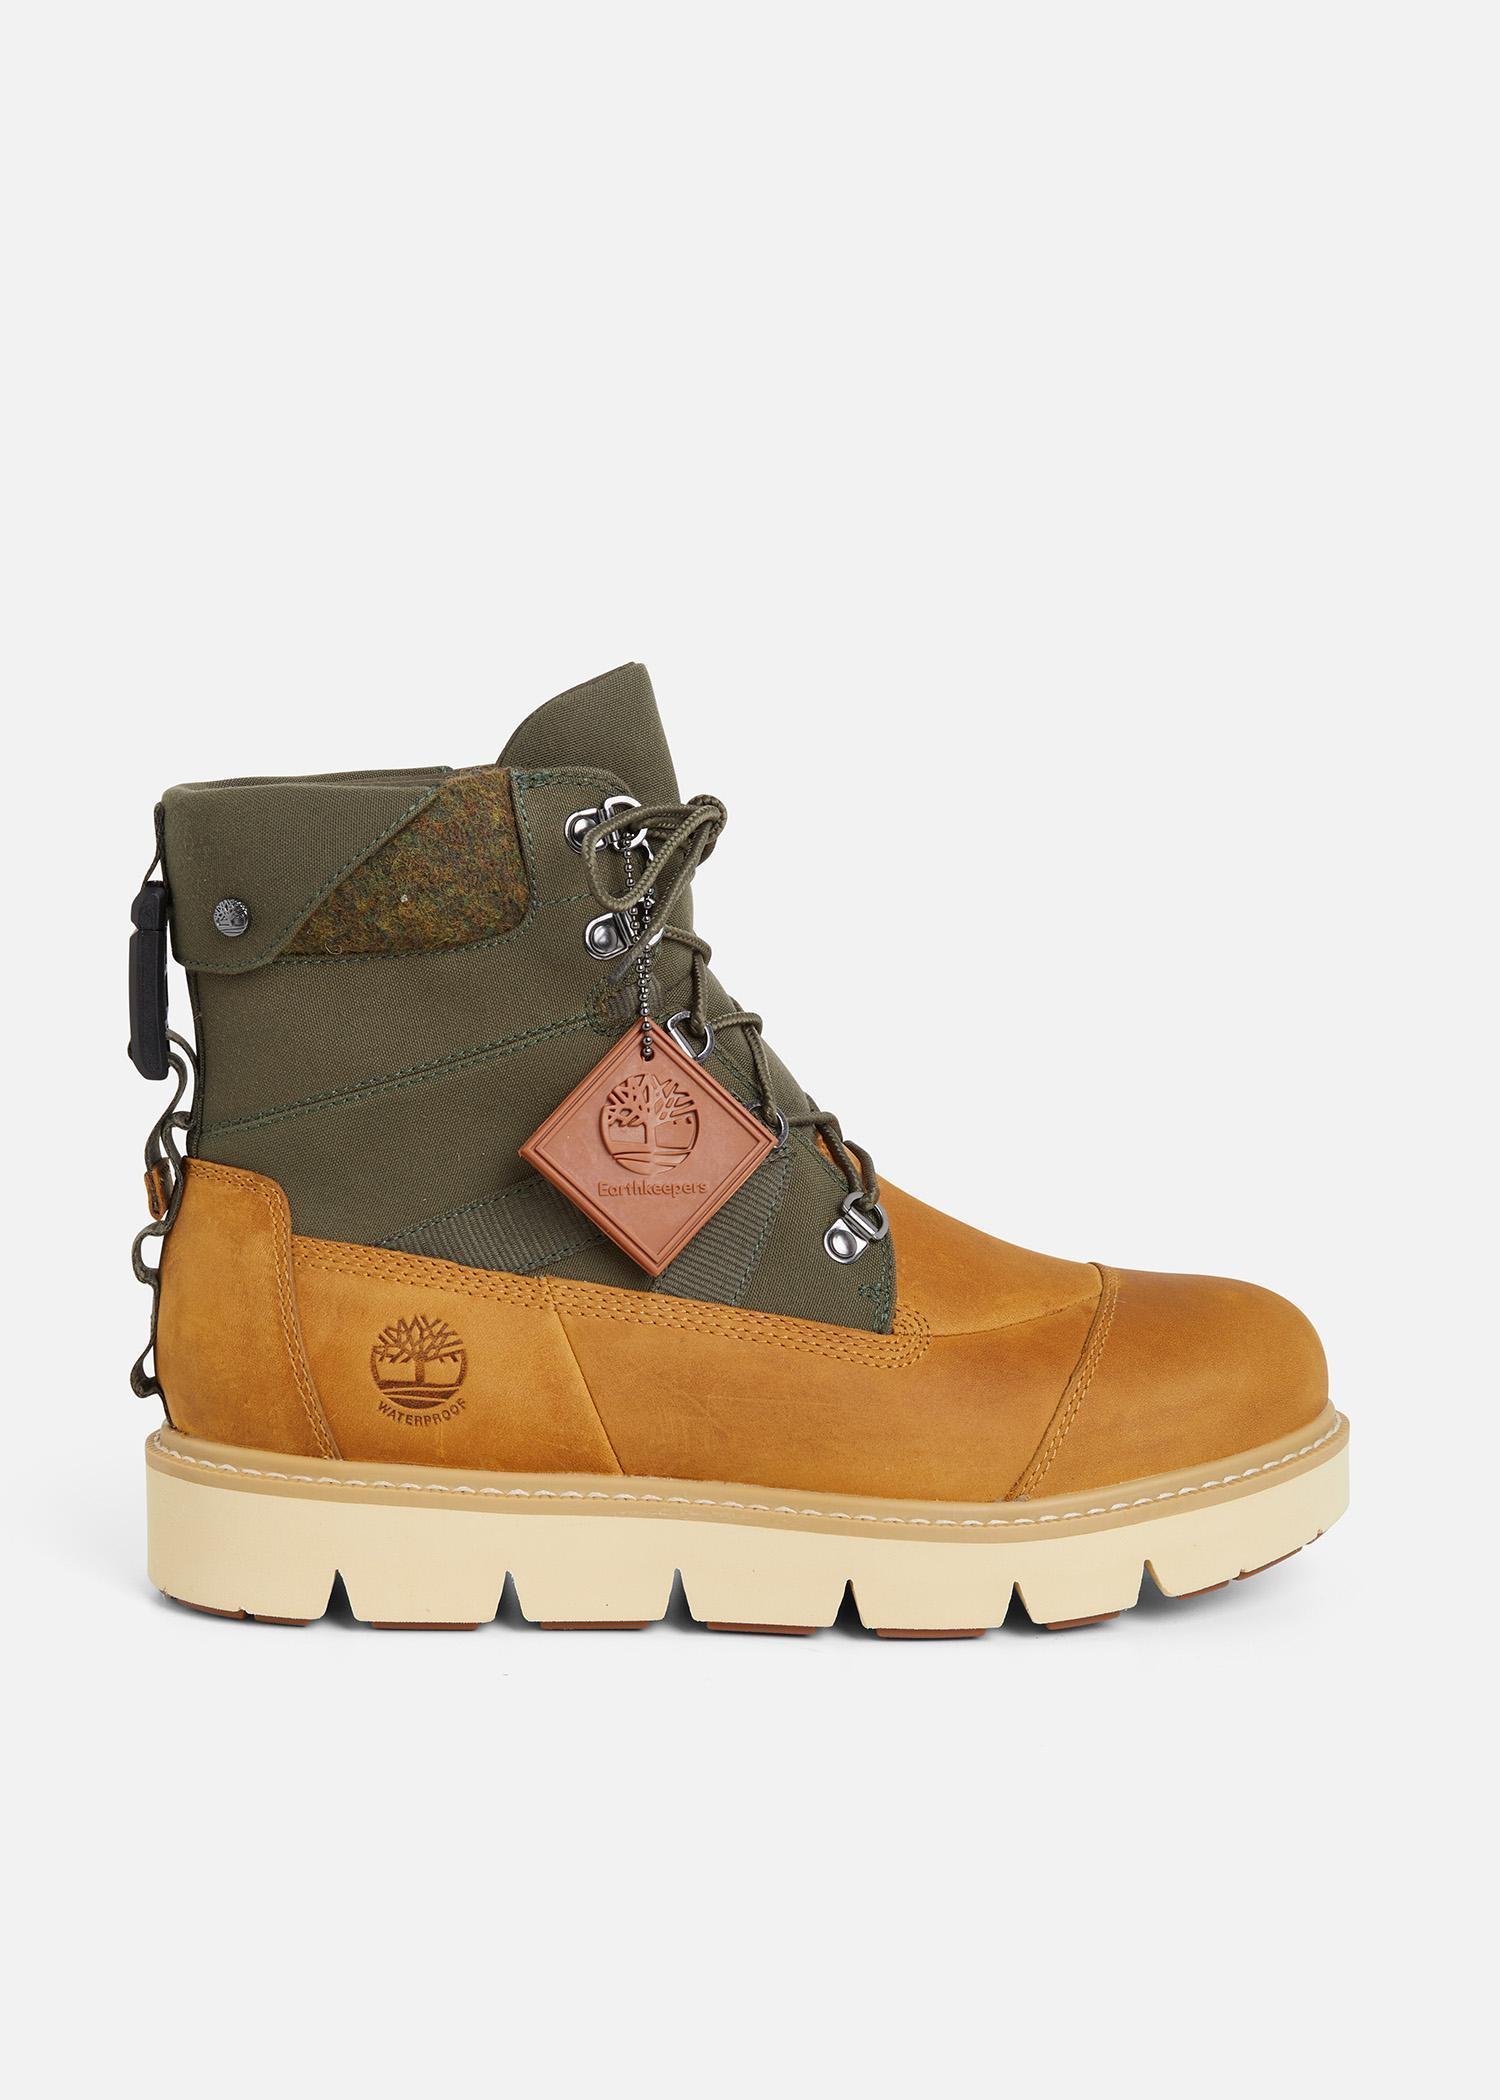 Raeburn: Christopher's latest responsible footwear for Timberland Milled